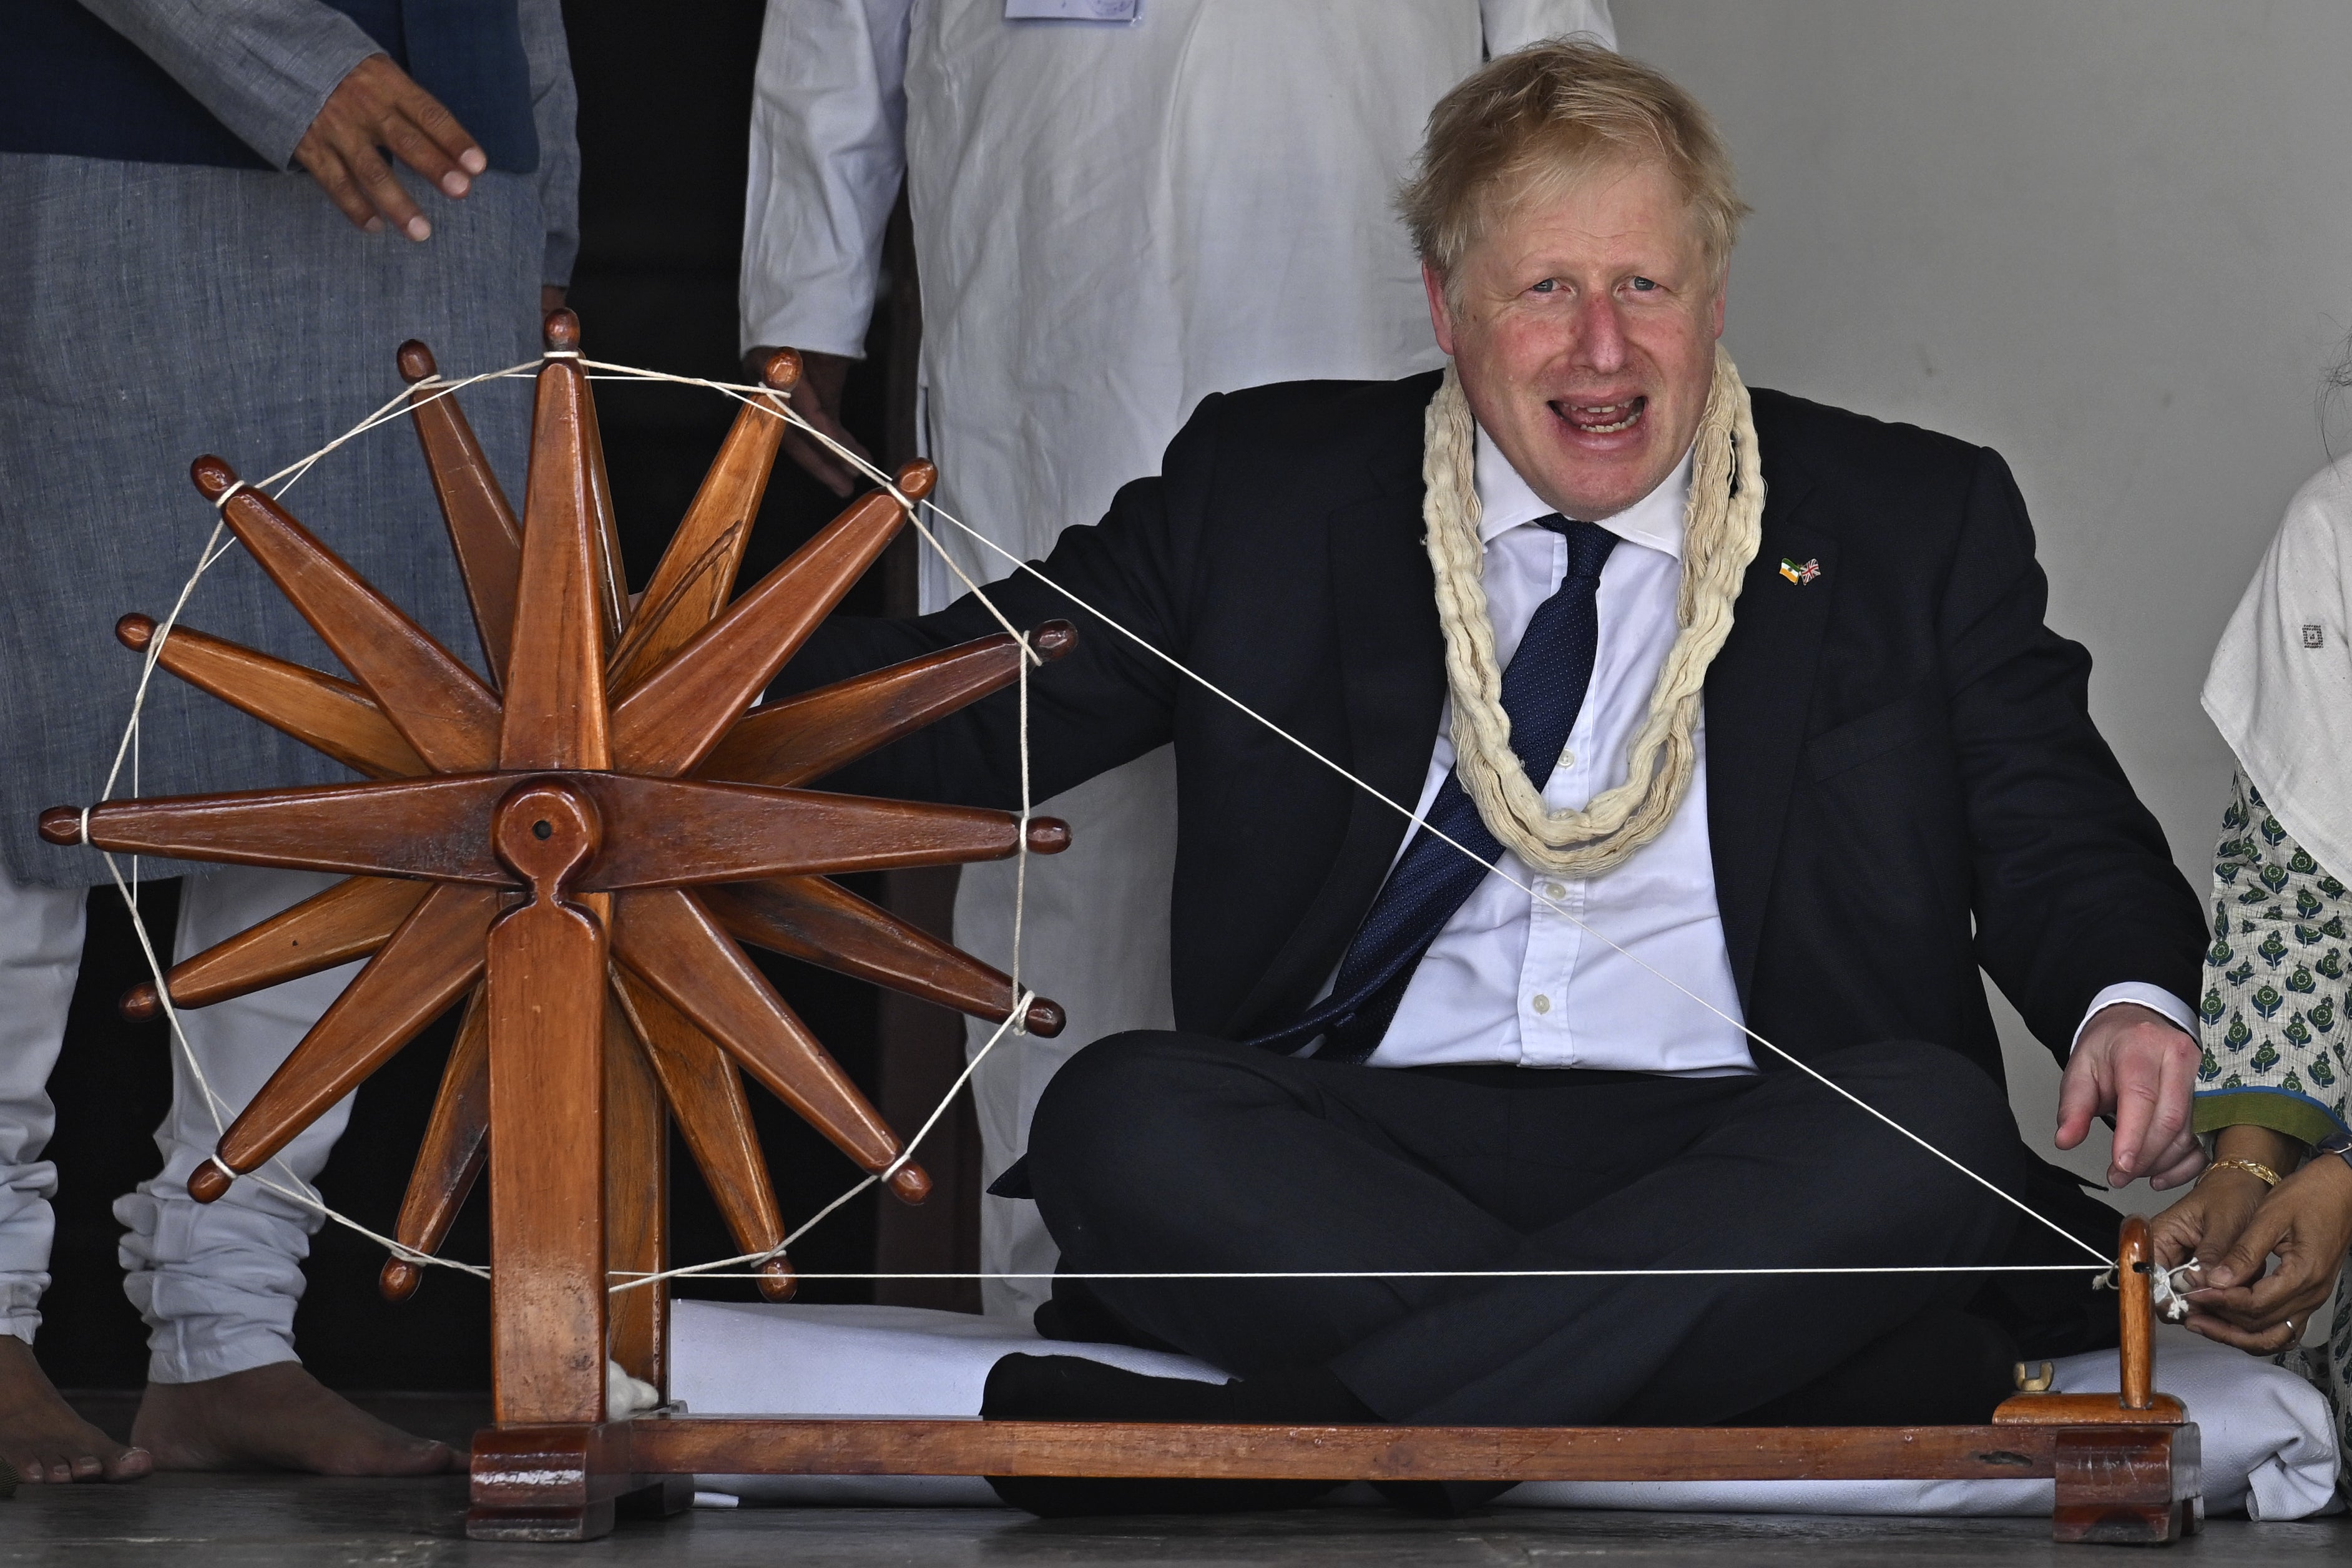 Prime Minister Boris Johnson spins khadi on a charkha during his visit to Mahatma Gandhi’s Sabarmati Ashram in Ahmedabad, as part of his two-day trip to India (Stefan Rousseau/PA)